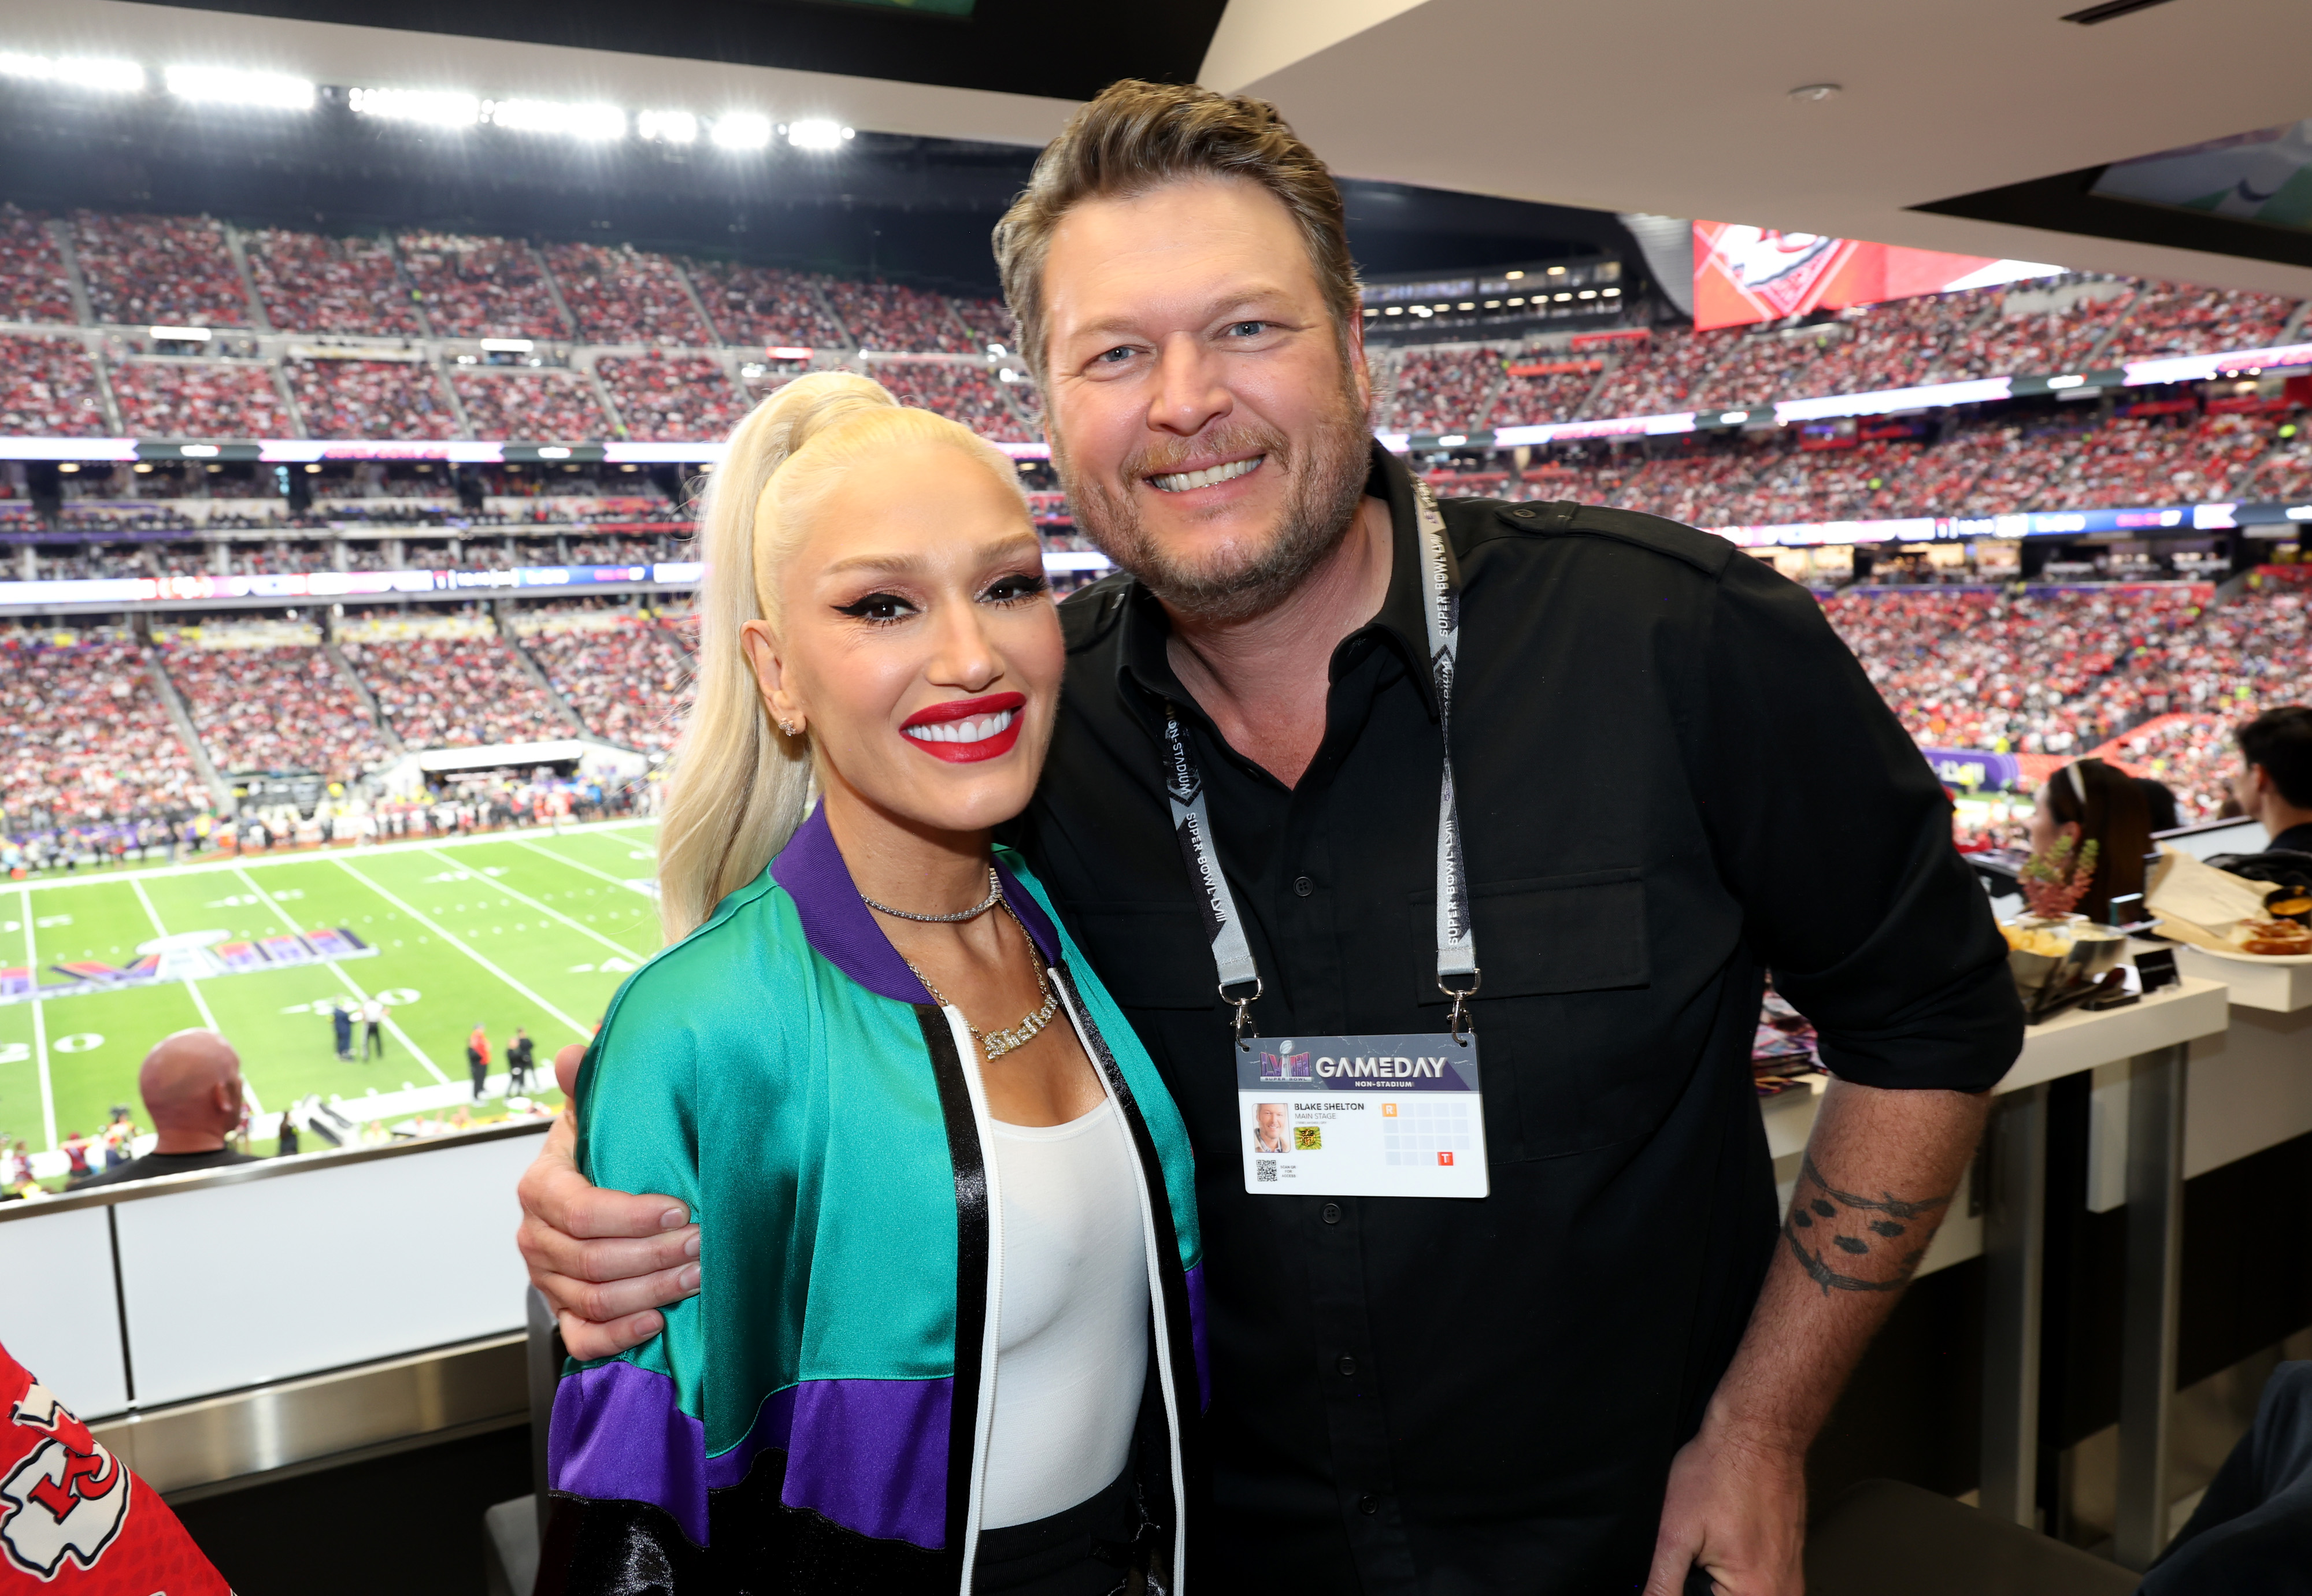 Some fans wondered why Blake didn't support Gwen's post